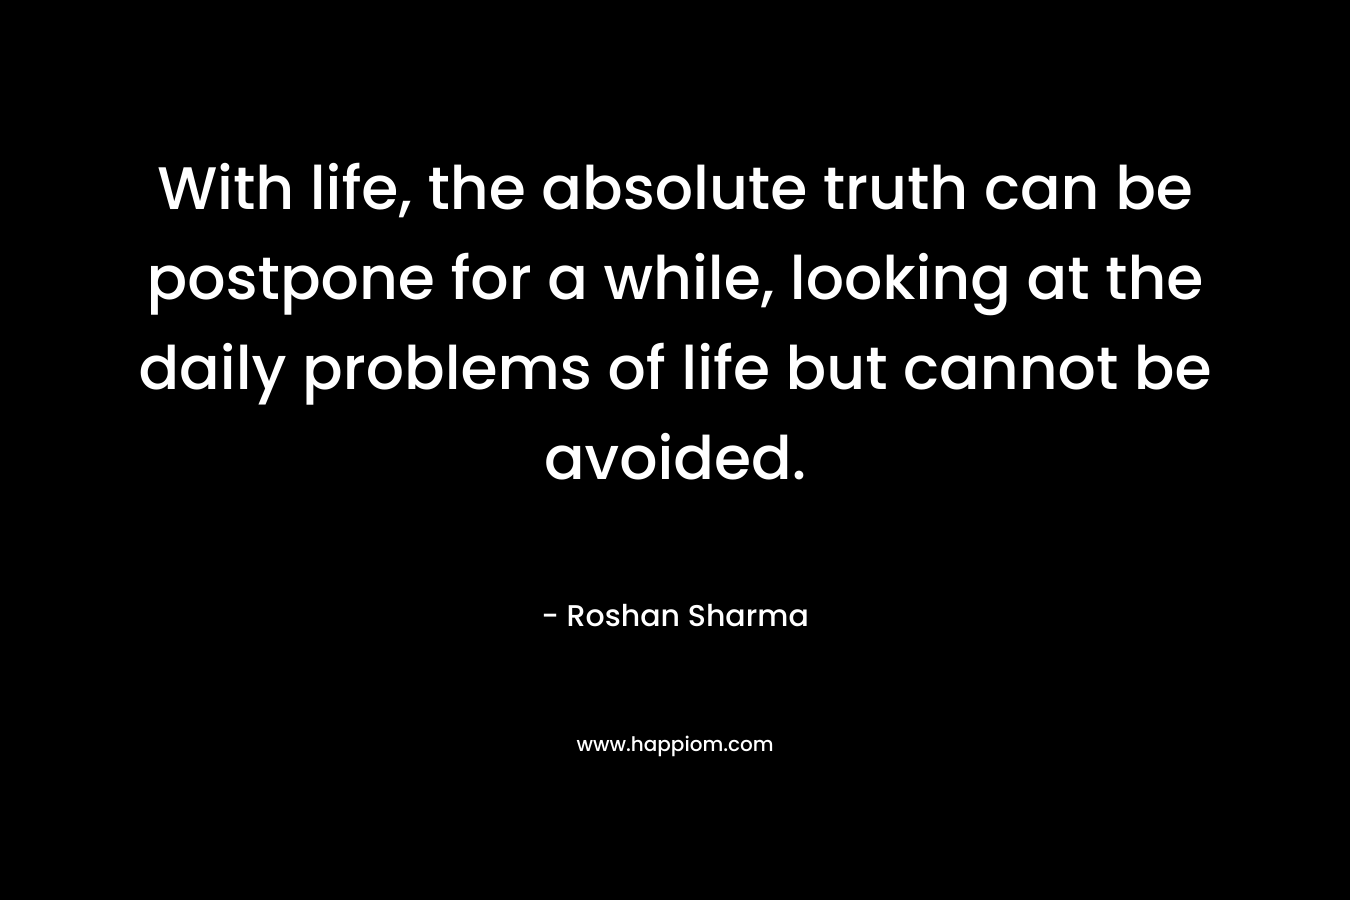 With life, the absolute truth can be postpone for a while, looking at the daily problems of life but cannot be avoided.